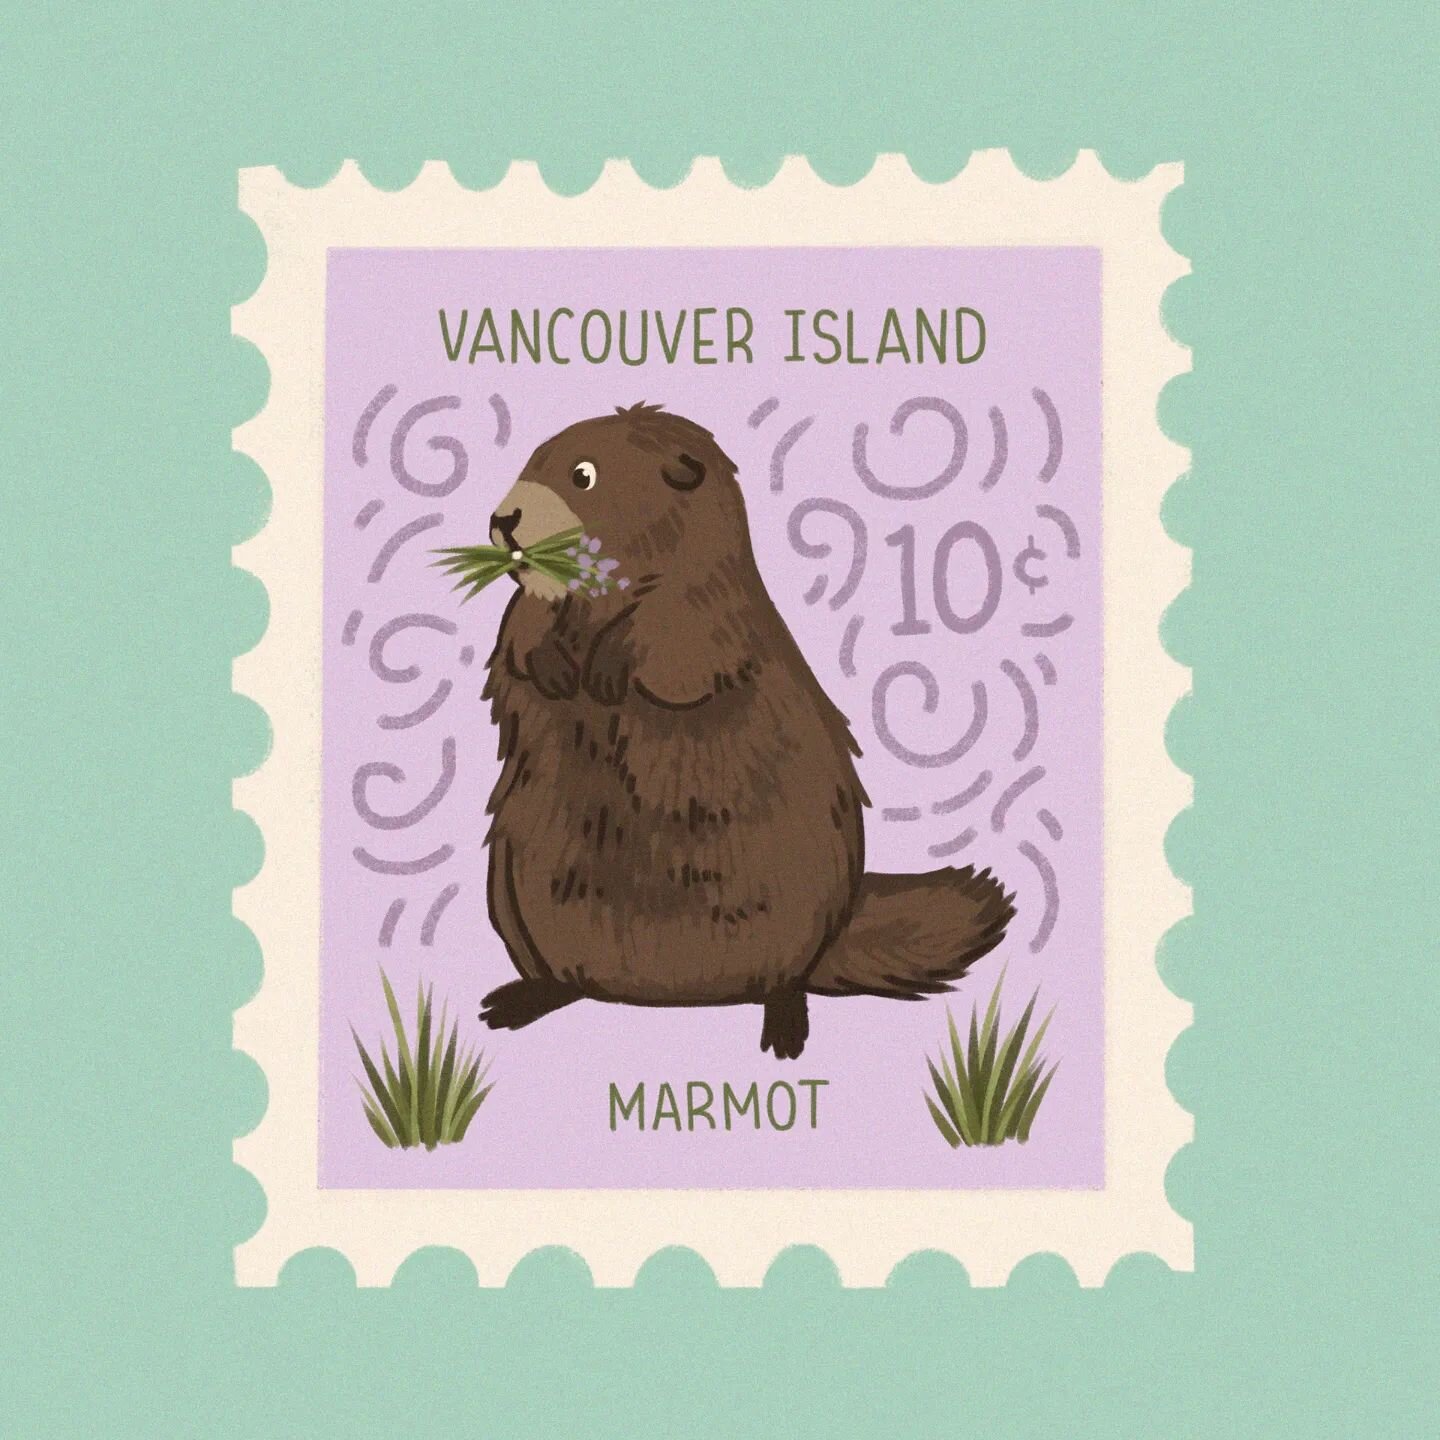 Violette the marmot may have predicted six more weeks of winter on Vancouver Island, but I'm hopeful Spring is on its way. Can we call the monsoon outside April showers? 😅💗🌿
.
.
.
@marmotrecovery #illustration #animalillustration #vancouverislandm